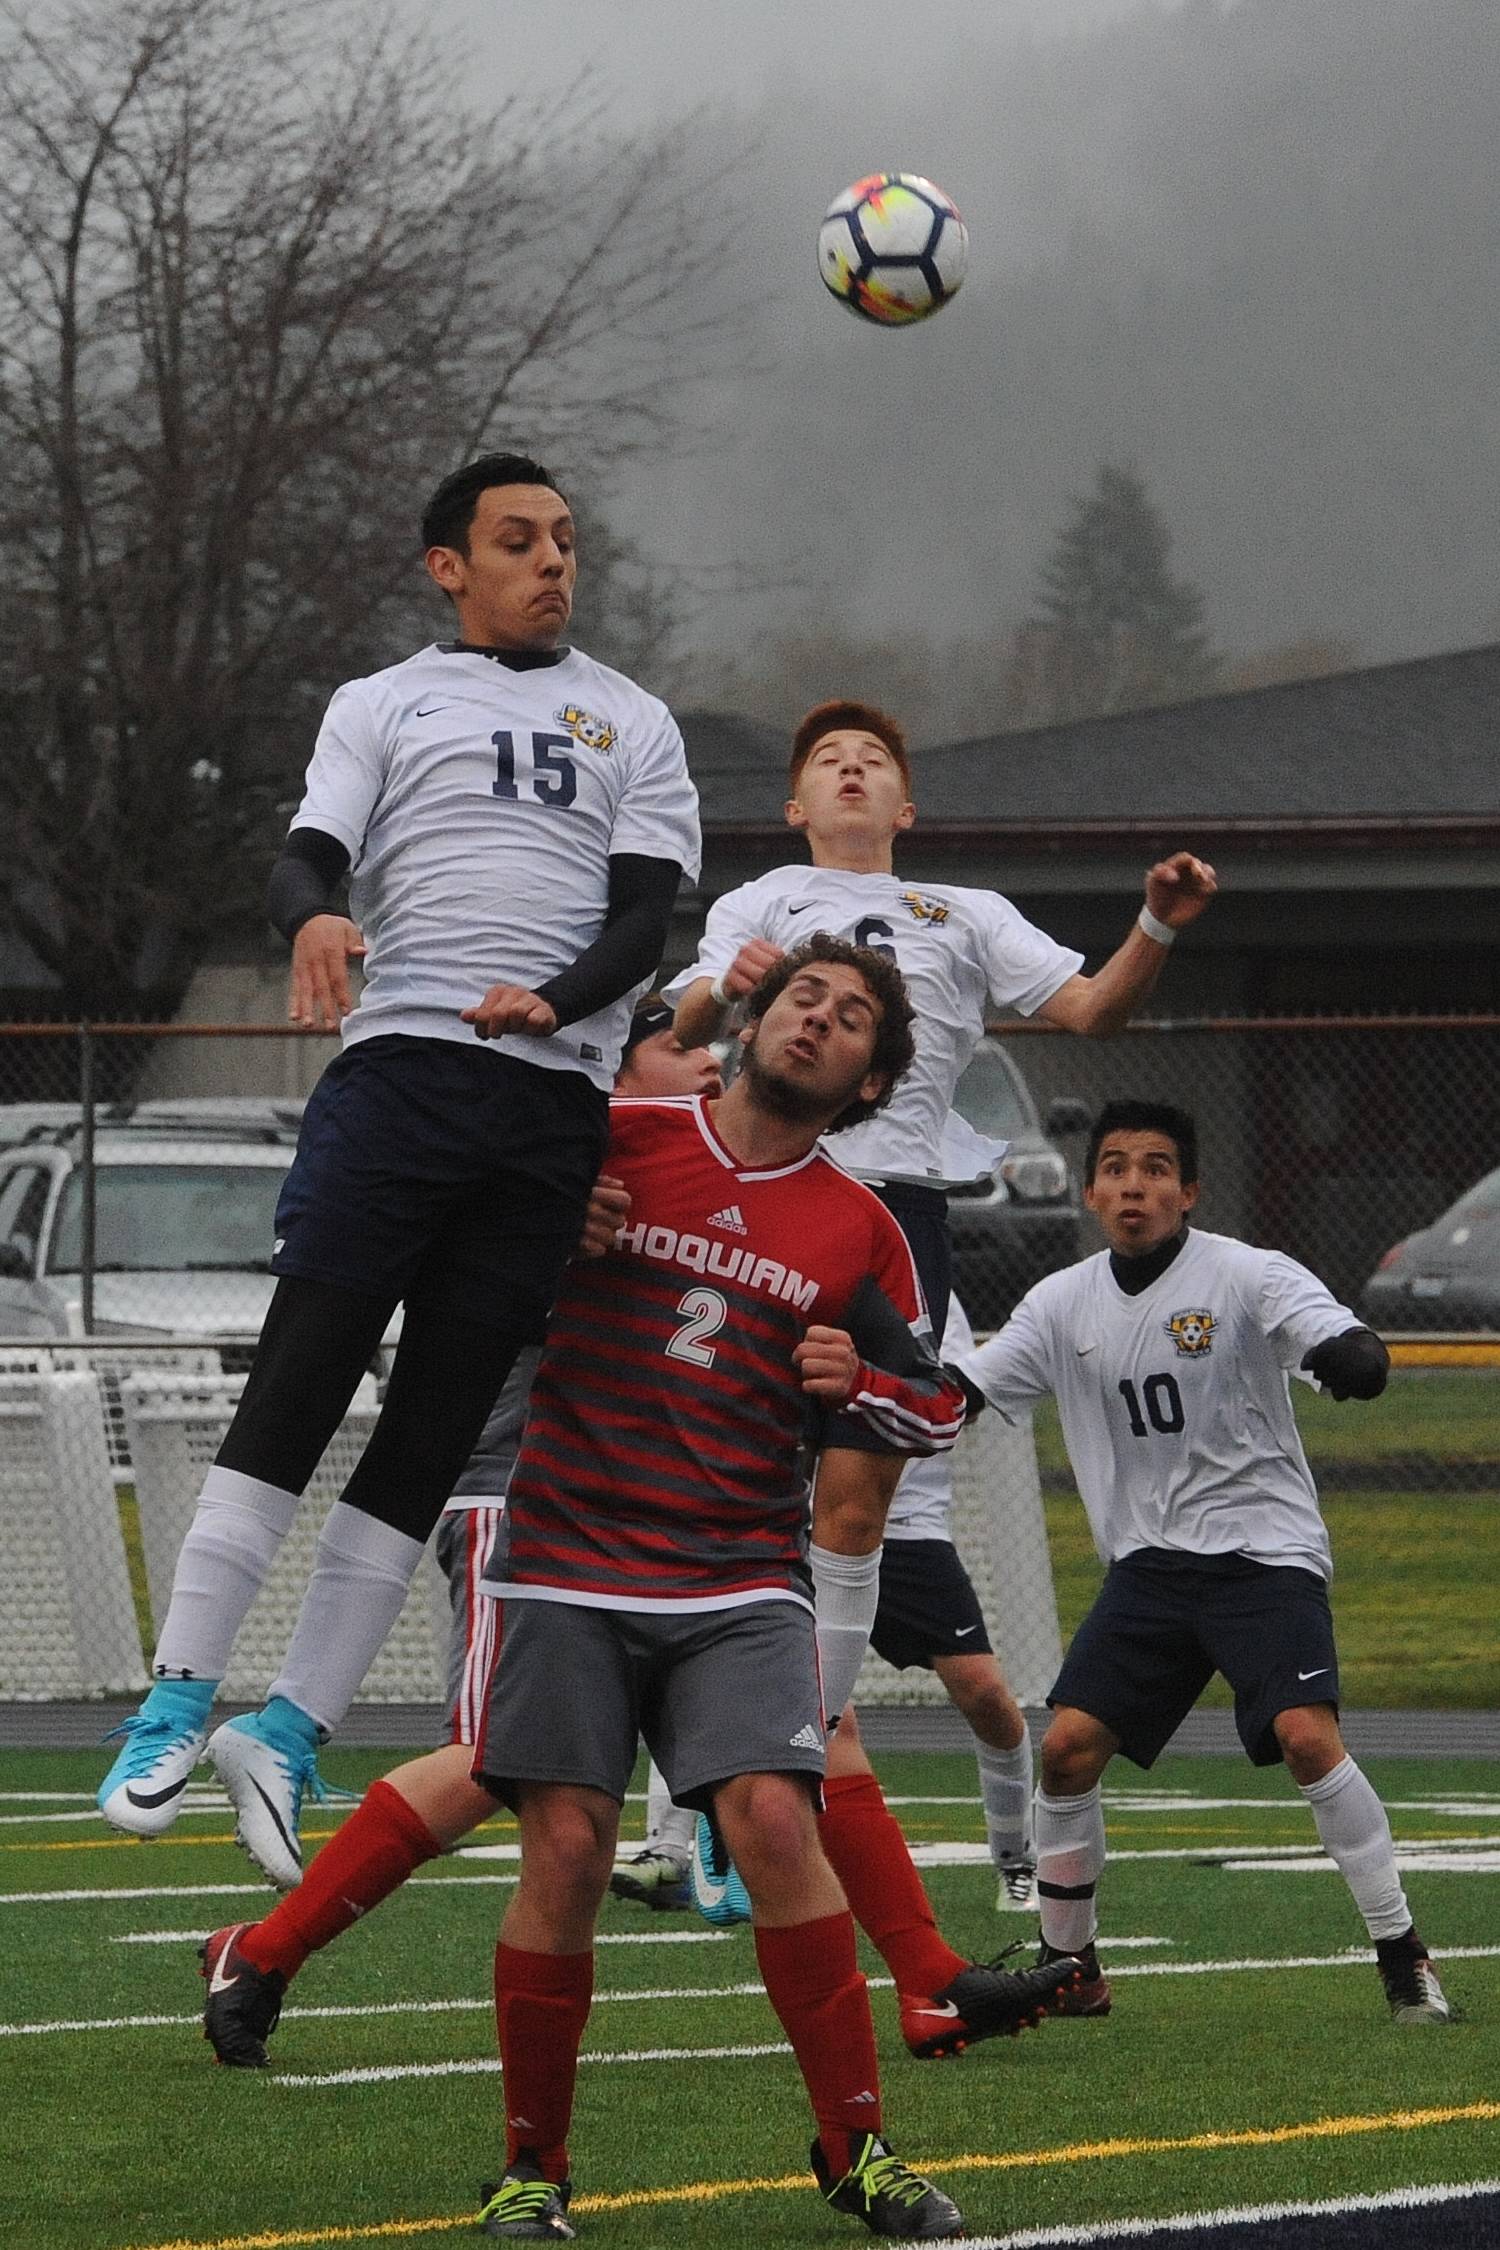 Spartan Aristeo Ayala (15) was picked to the first team. Oscar Gonzales (6) and Samuel Gomez (10) were honorable mention. Photos by Lonnie Archibald